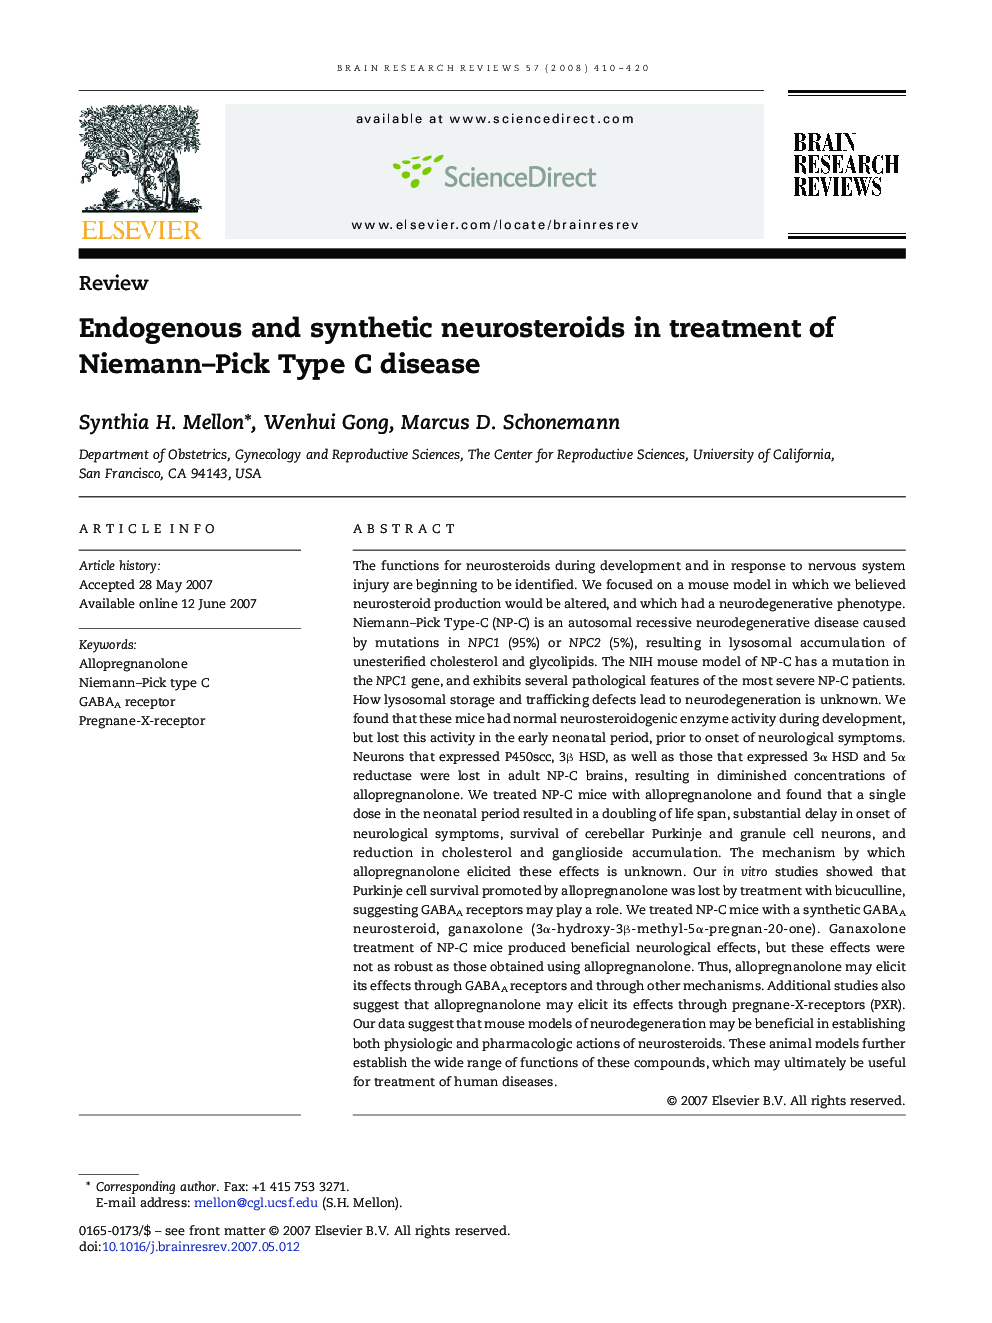 Endogenous and synthetic neurosteroids in treatment of Niemann–Pick Type C disease